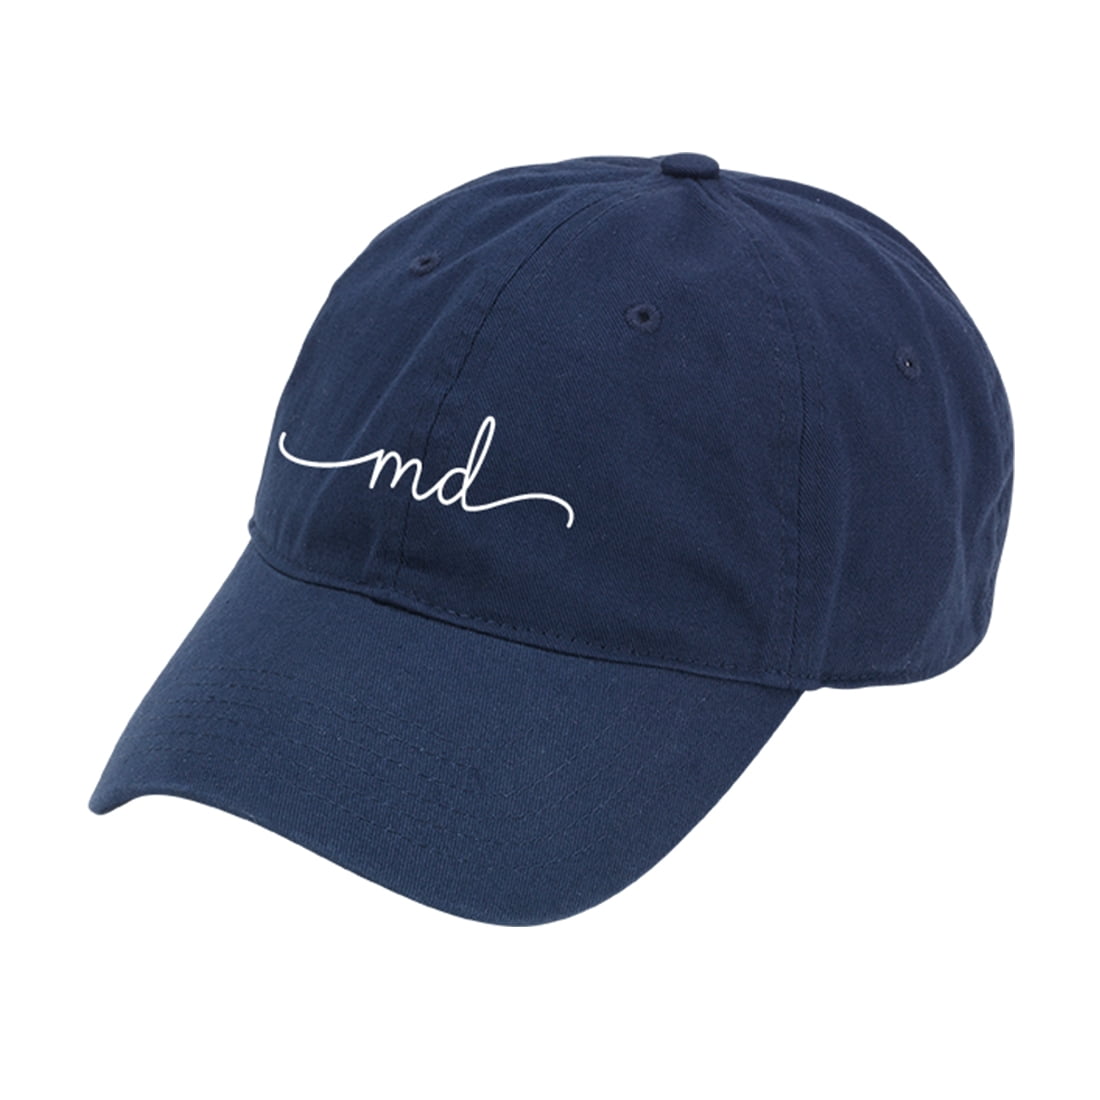 Maryland Rep Your State Navy Cap